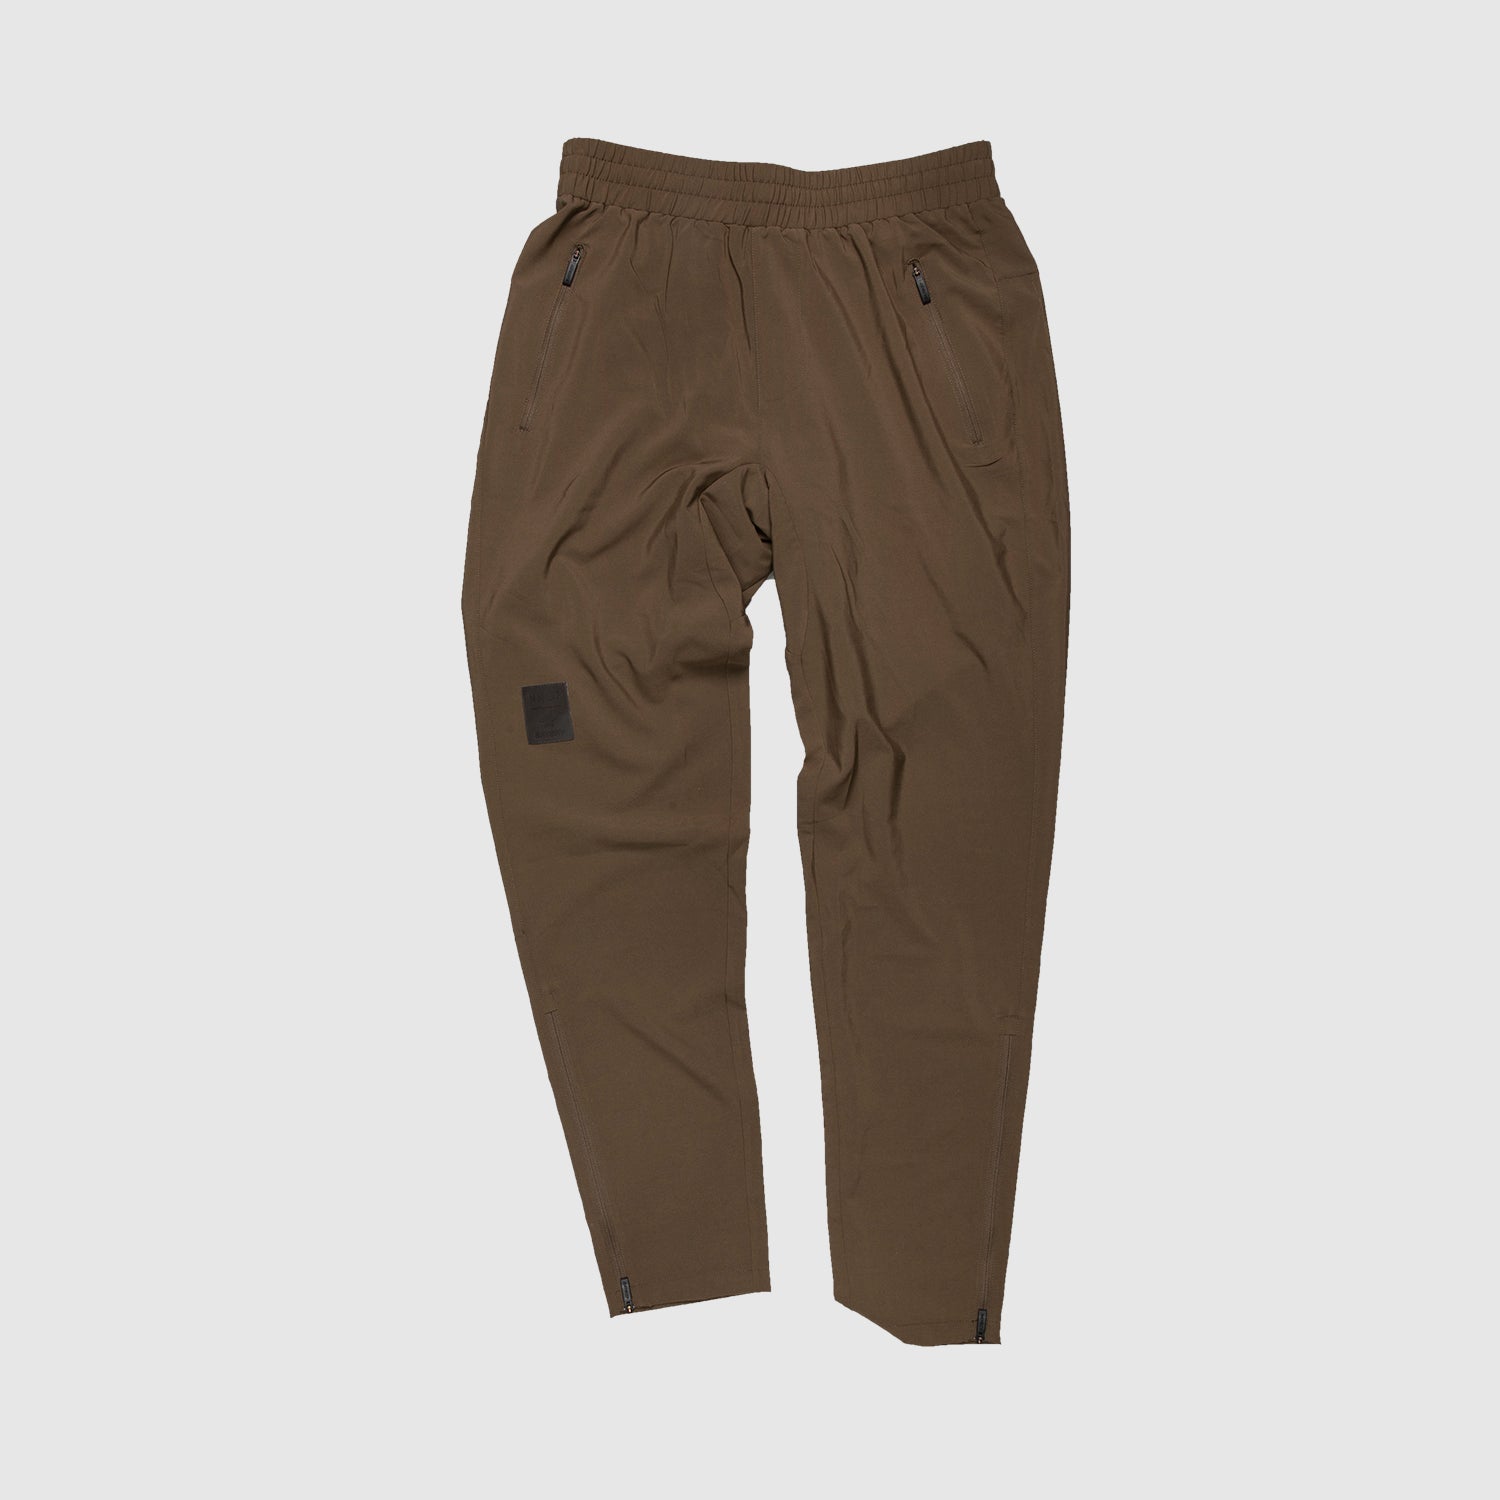 SAYSKY 2in1 PACE PANTS 色clay Lサイズ